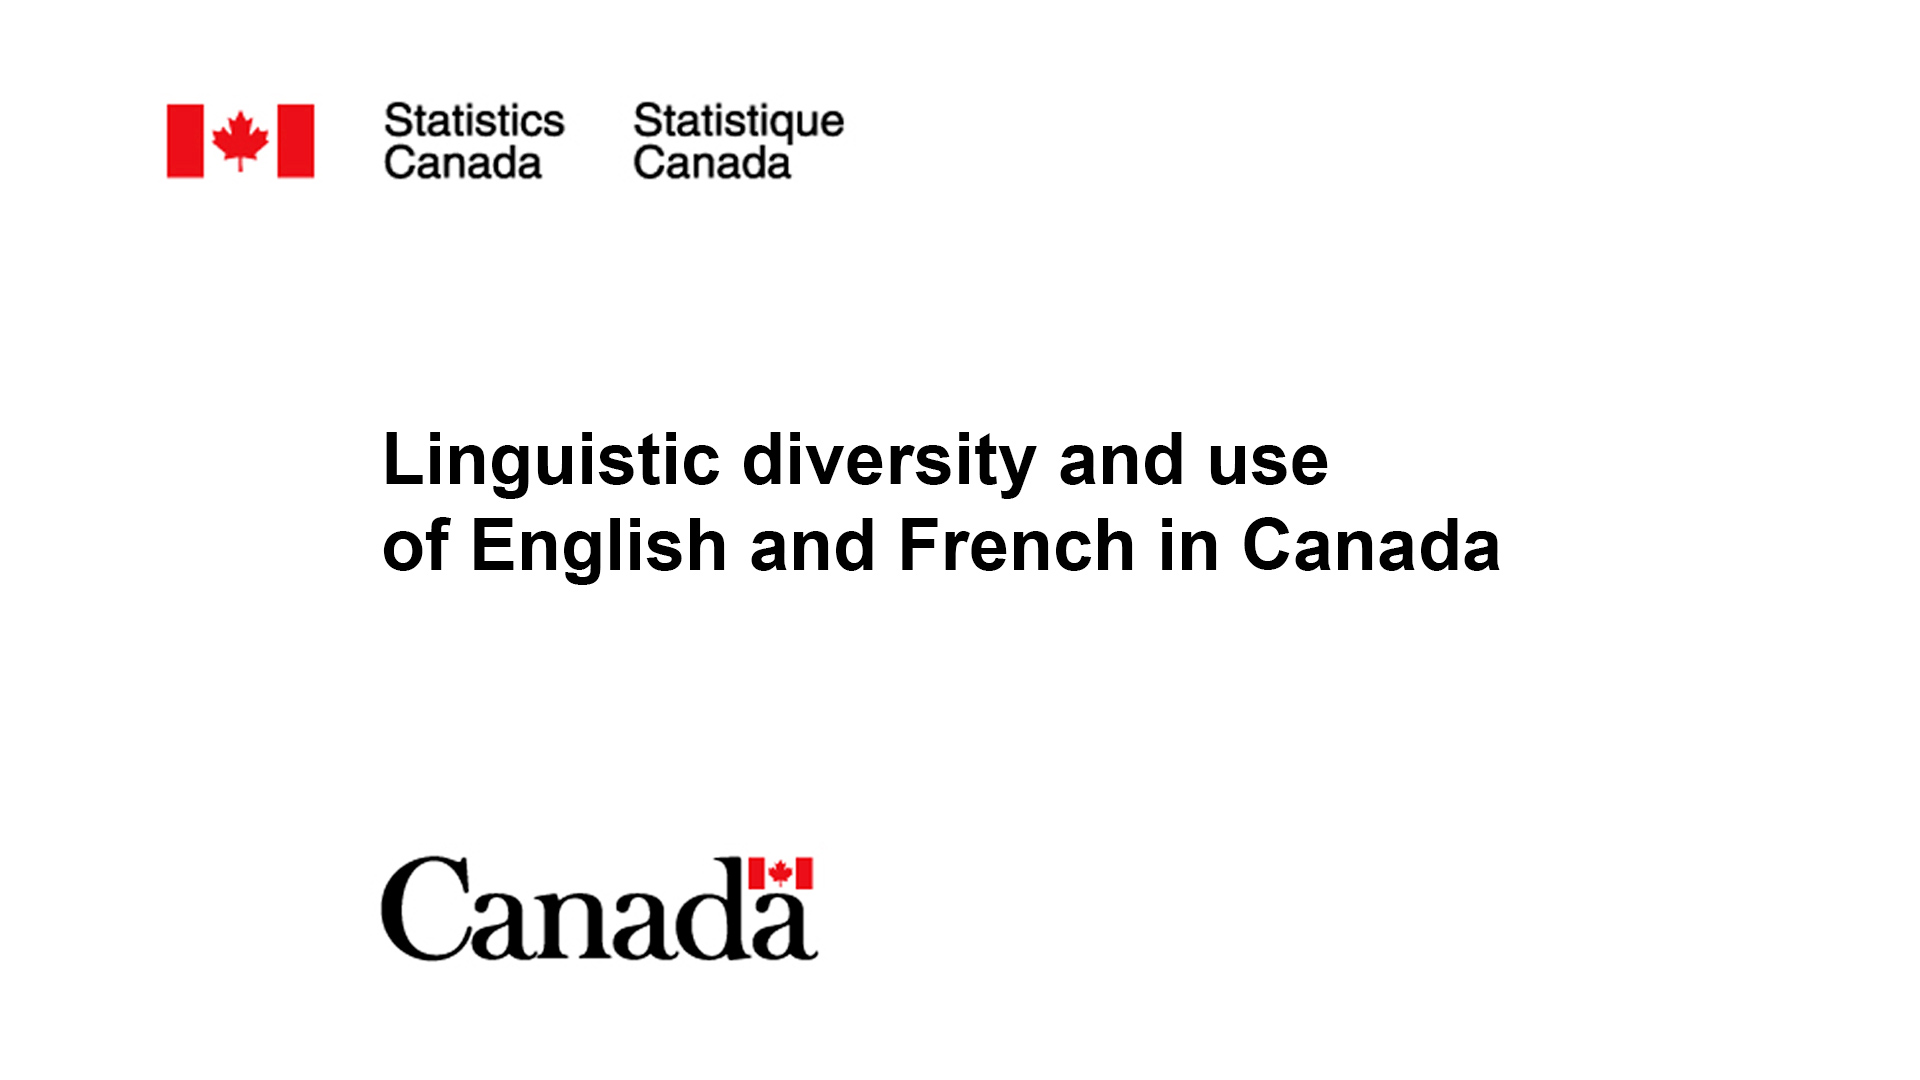 Linguistic diversity and use of English and French in Canada